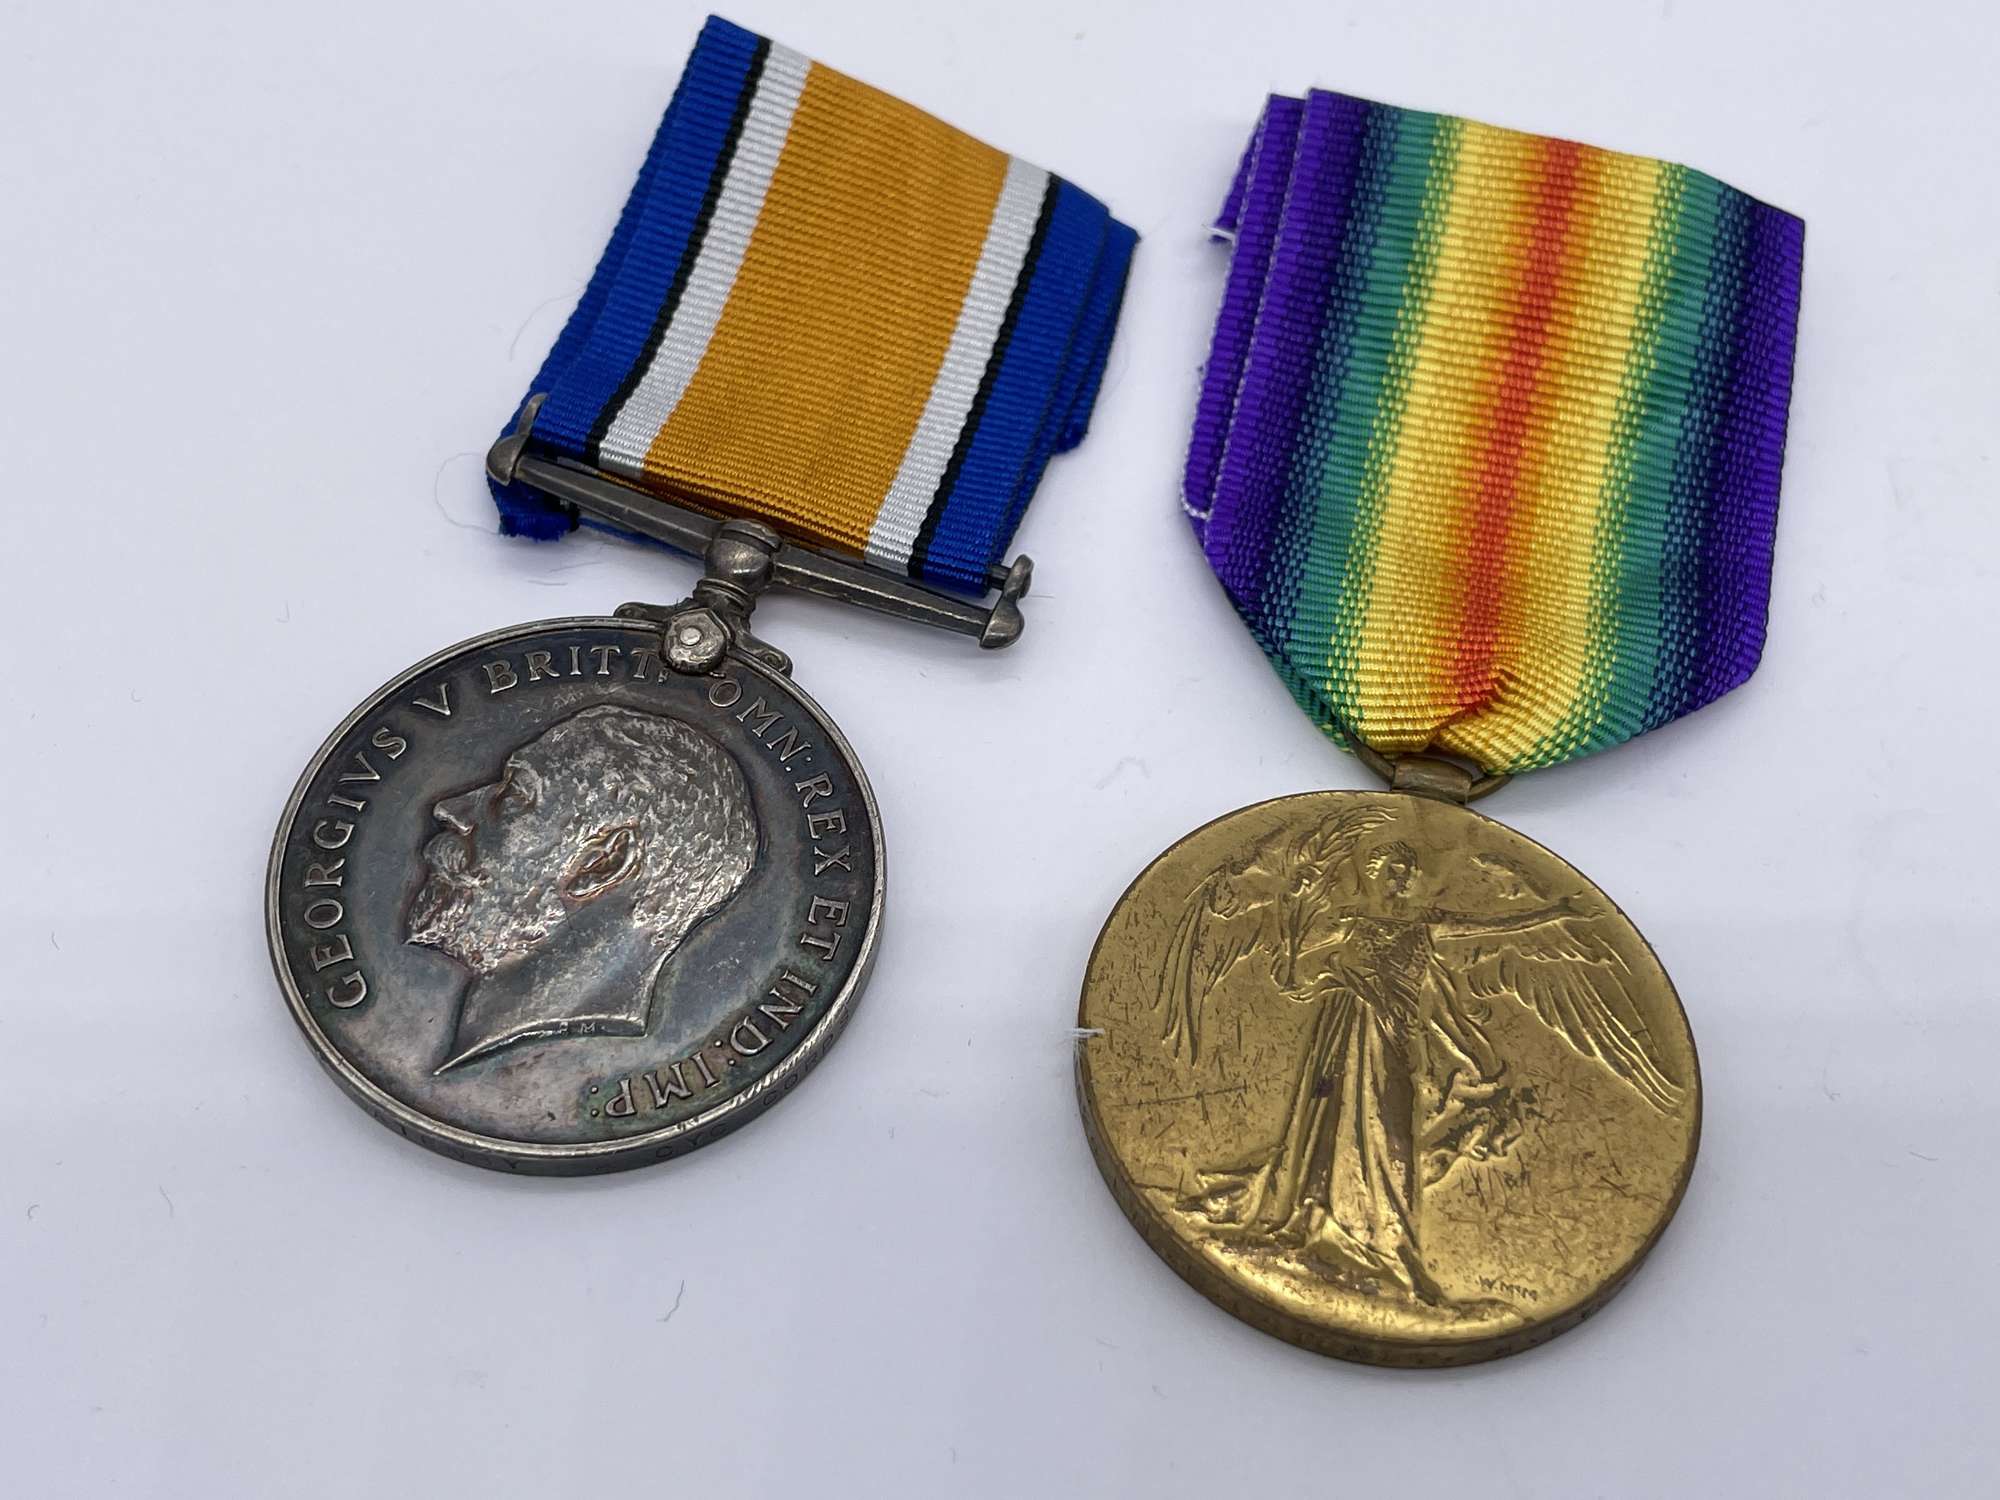 Original World War One Medal Pair, Pte Gatenby, Army Cyclist Corps